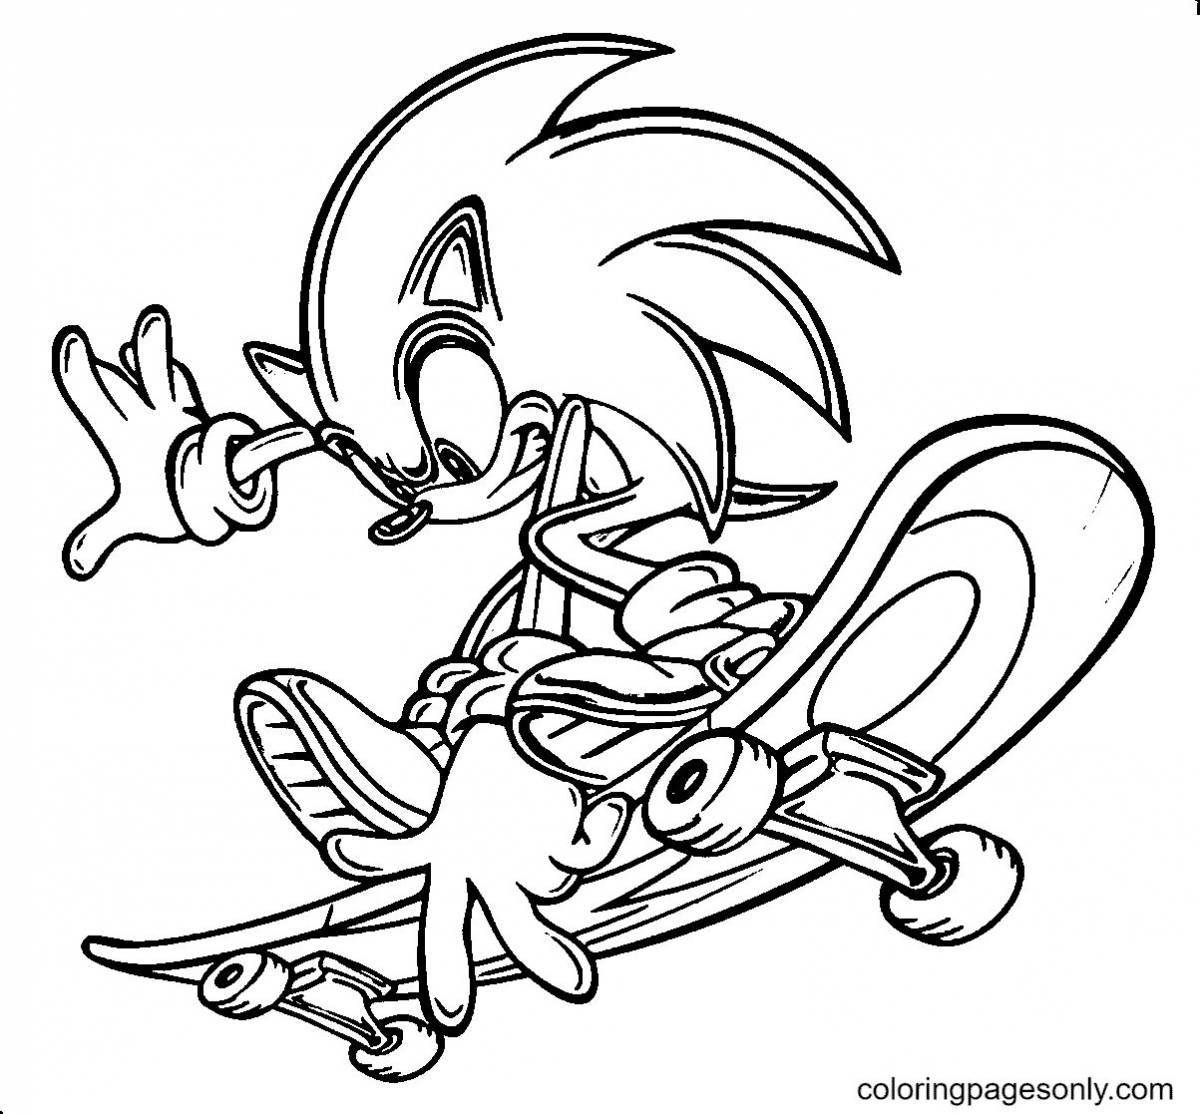 Vivacious sonic shredder coloring page